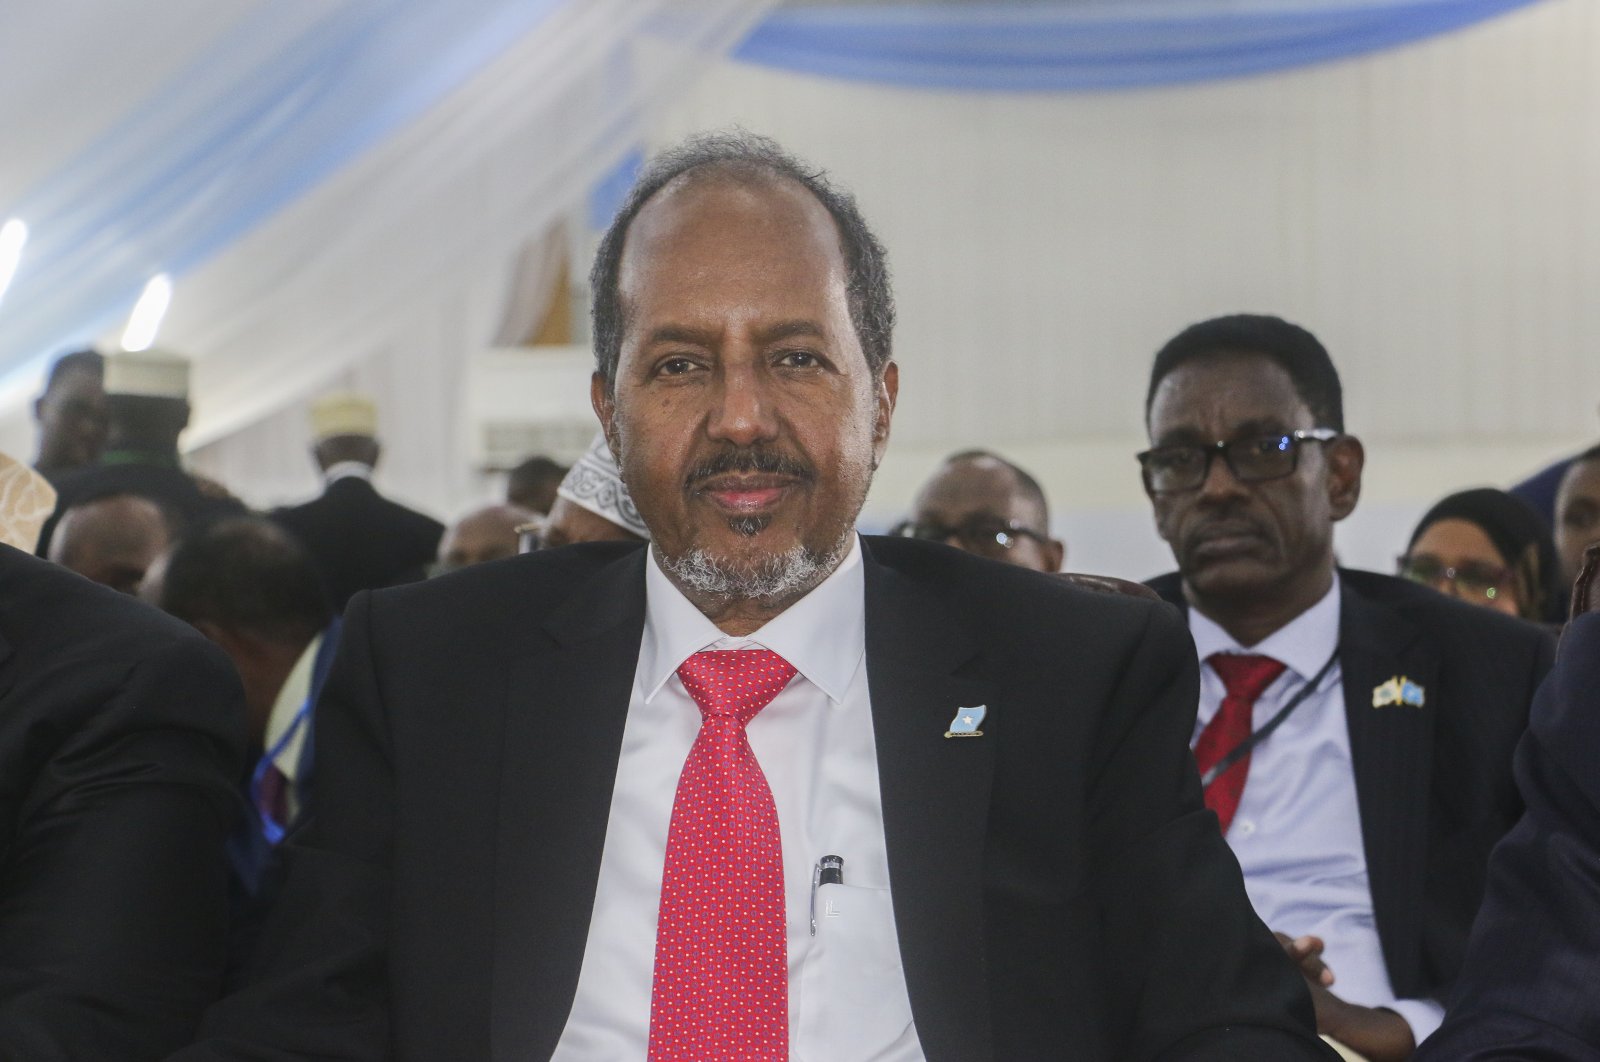 Former President Hassan Sheikh Mohamud after being sworn in as the new president of Somalia after being elected by Somali members of parliament in the presidential elections in the capital Mogadishu, Somalia, May 15, 2022.( EPA Photo)